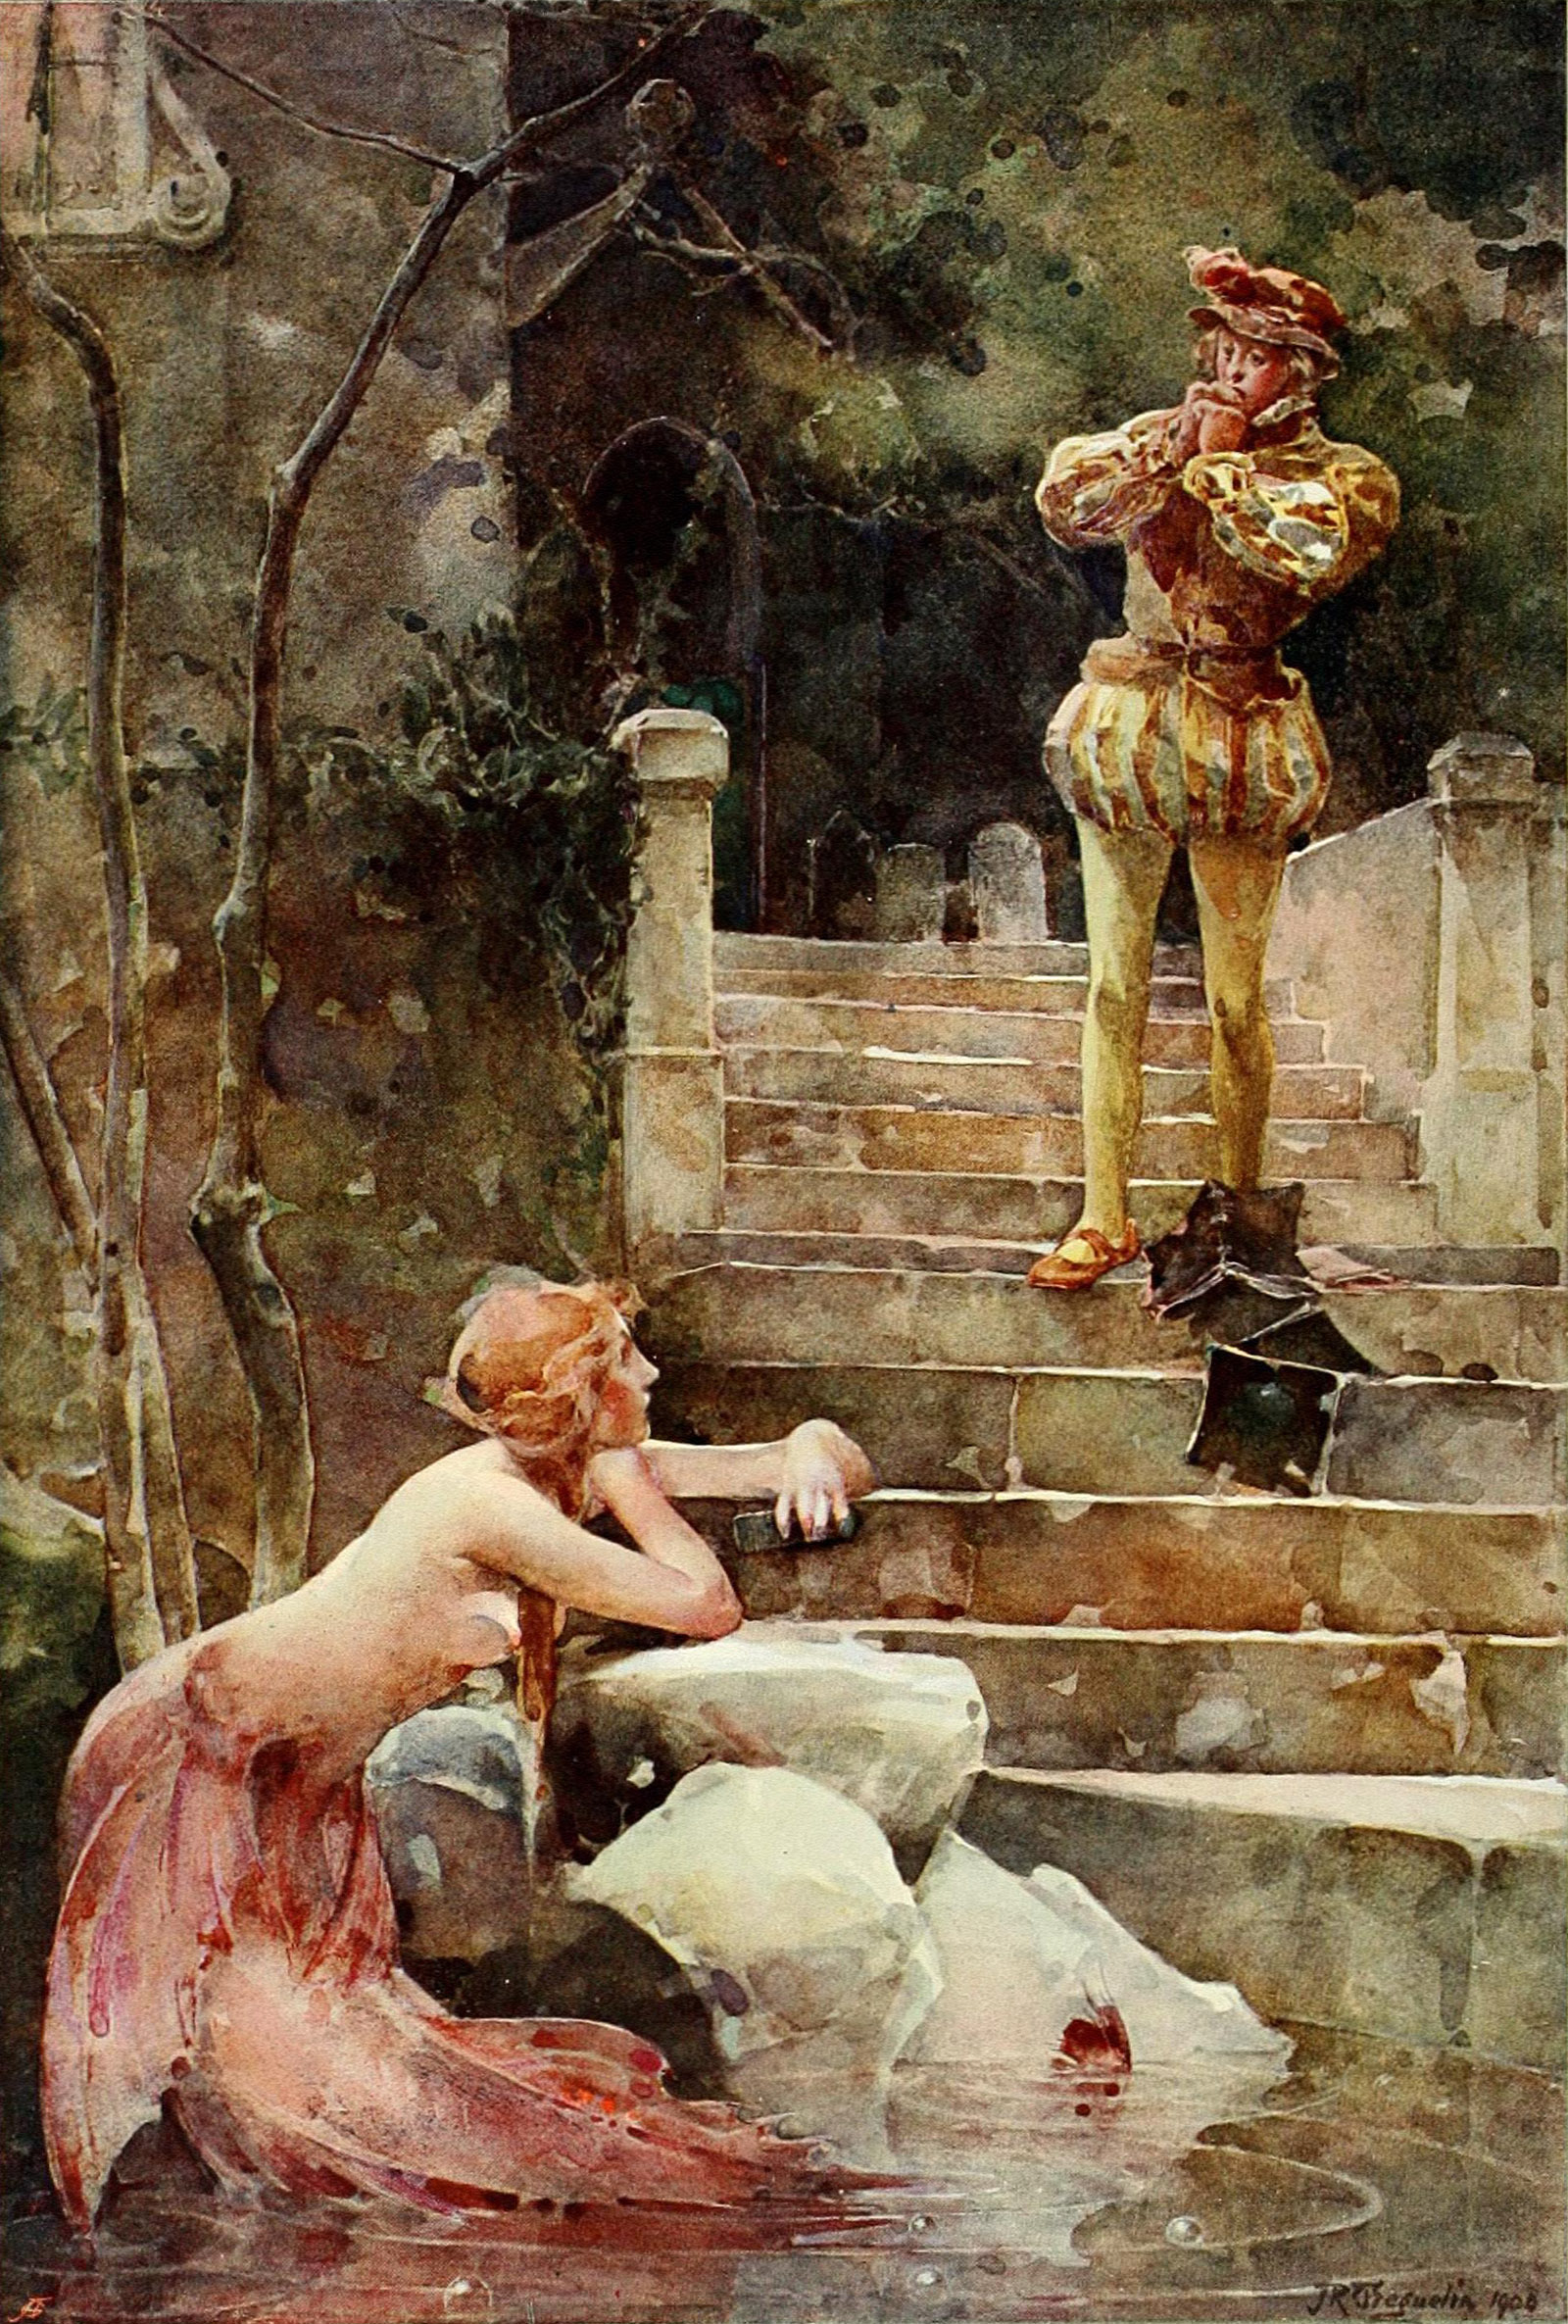 A man standing outdoors serenading a mermaid with his voice